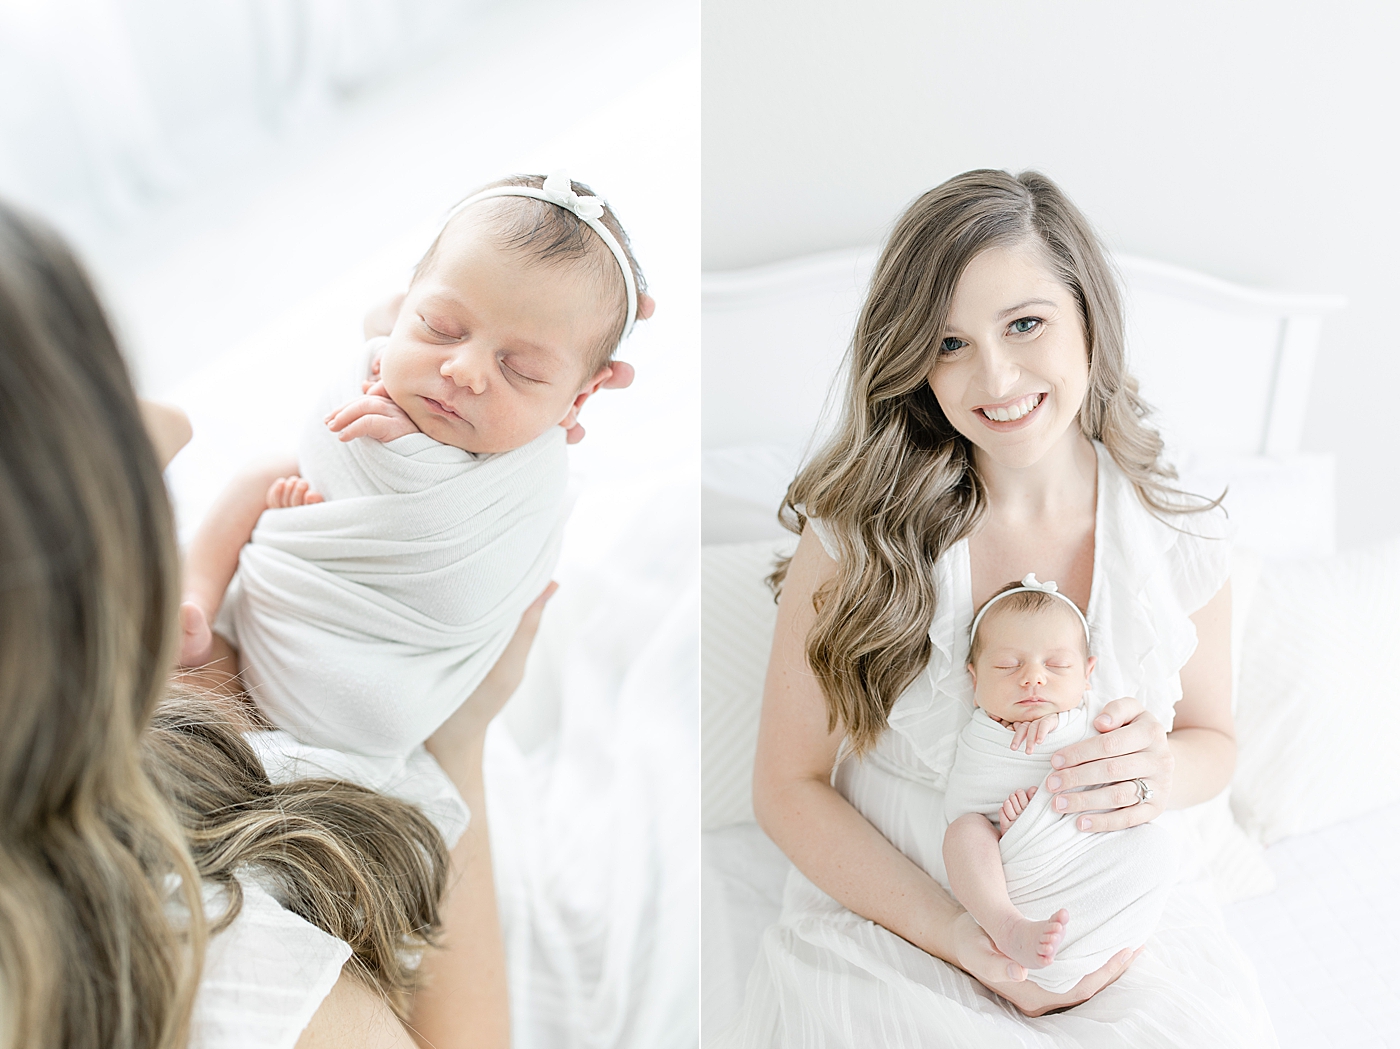 Mom with new baby in studio | Photo by Little Sunshine Photography.